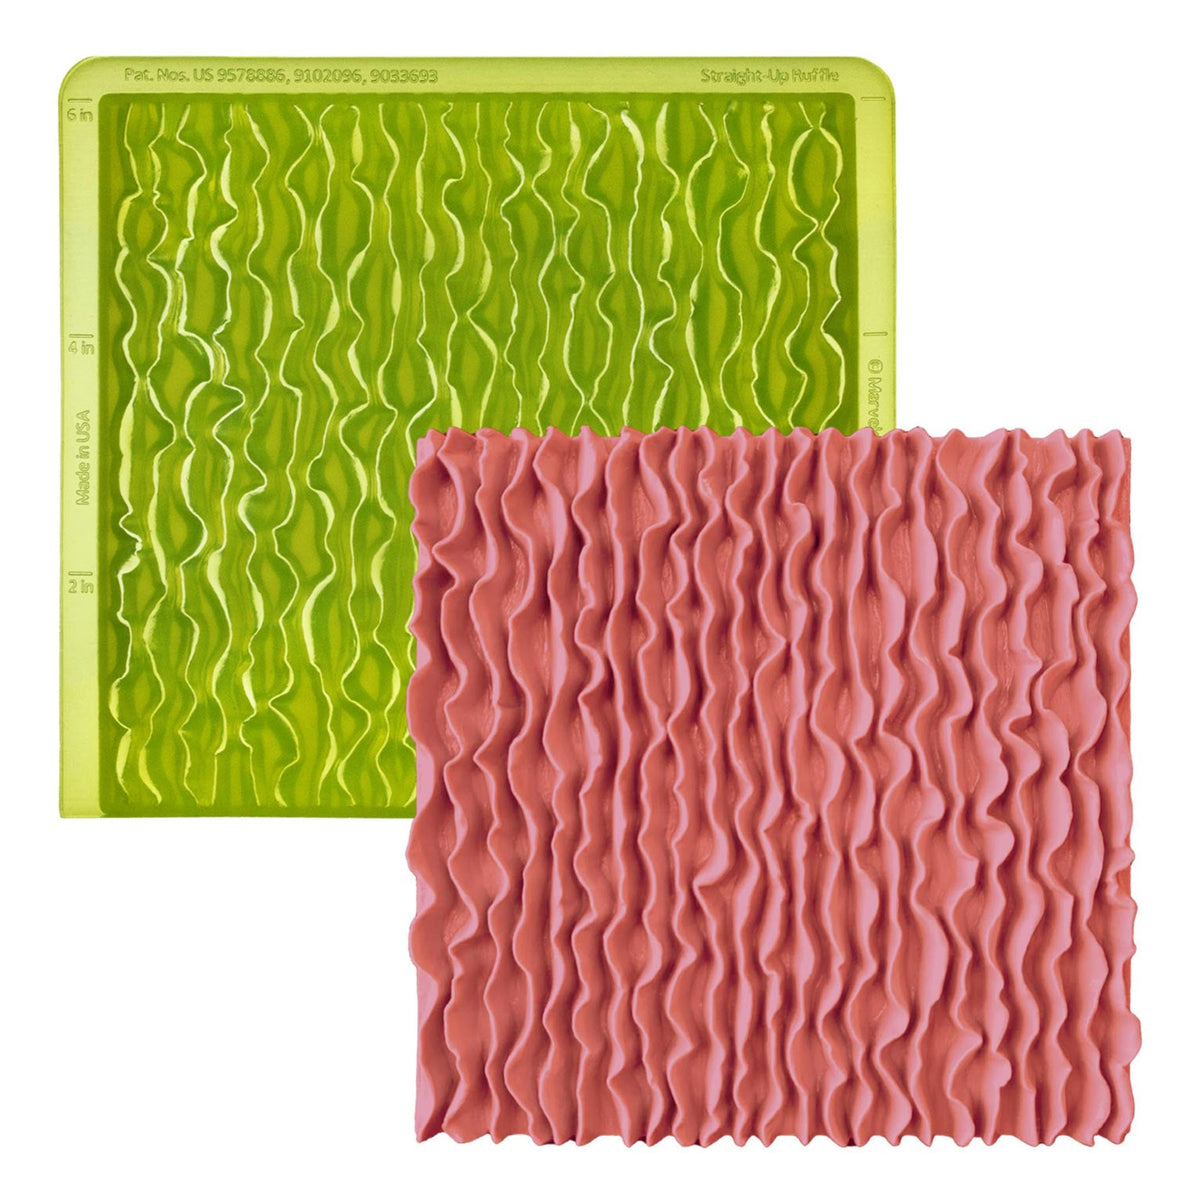 Straight Up Silicone Simpress, Texture Mat, Sprig Mold for Ceramics by Marvelous Molds